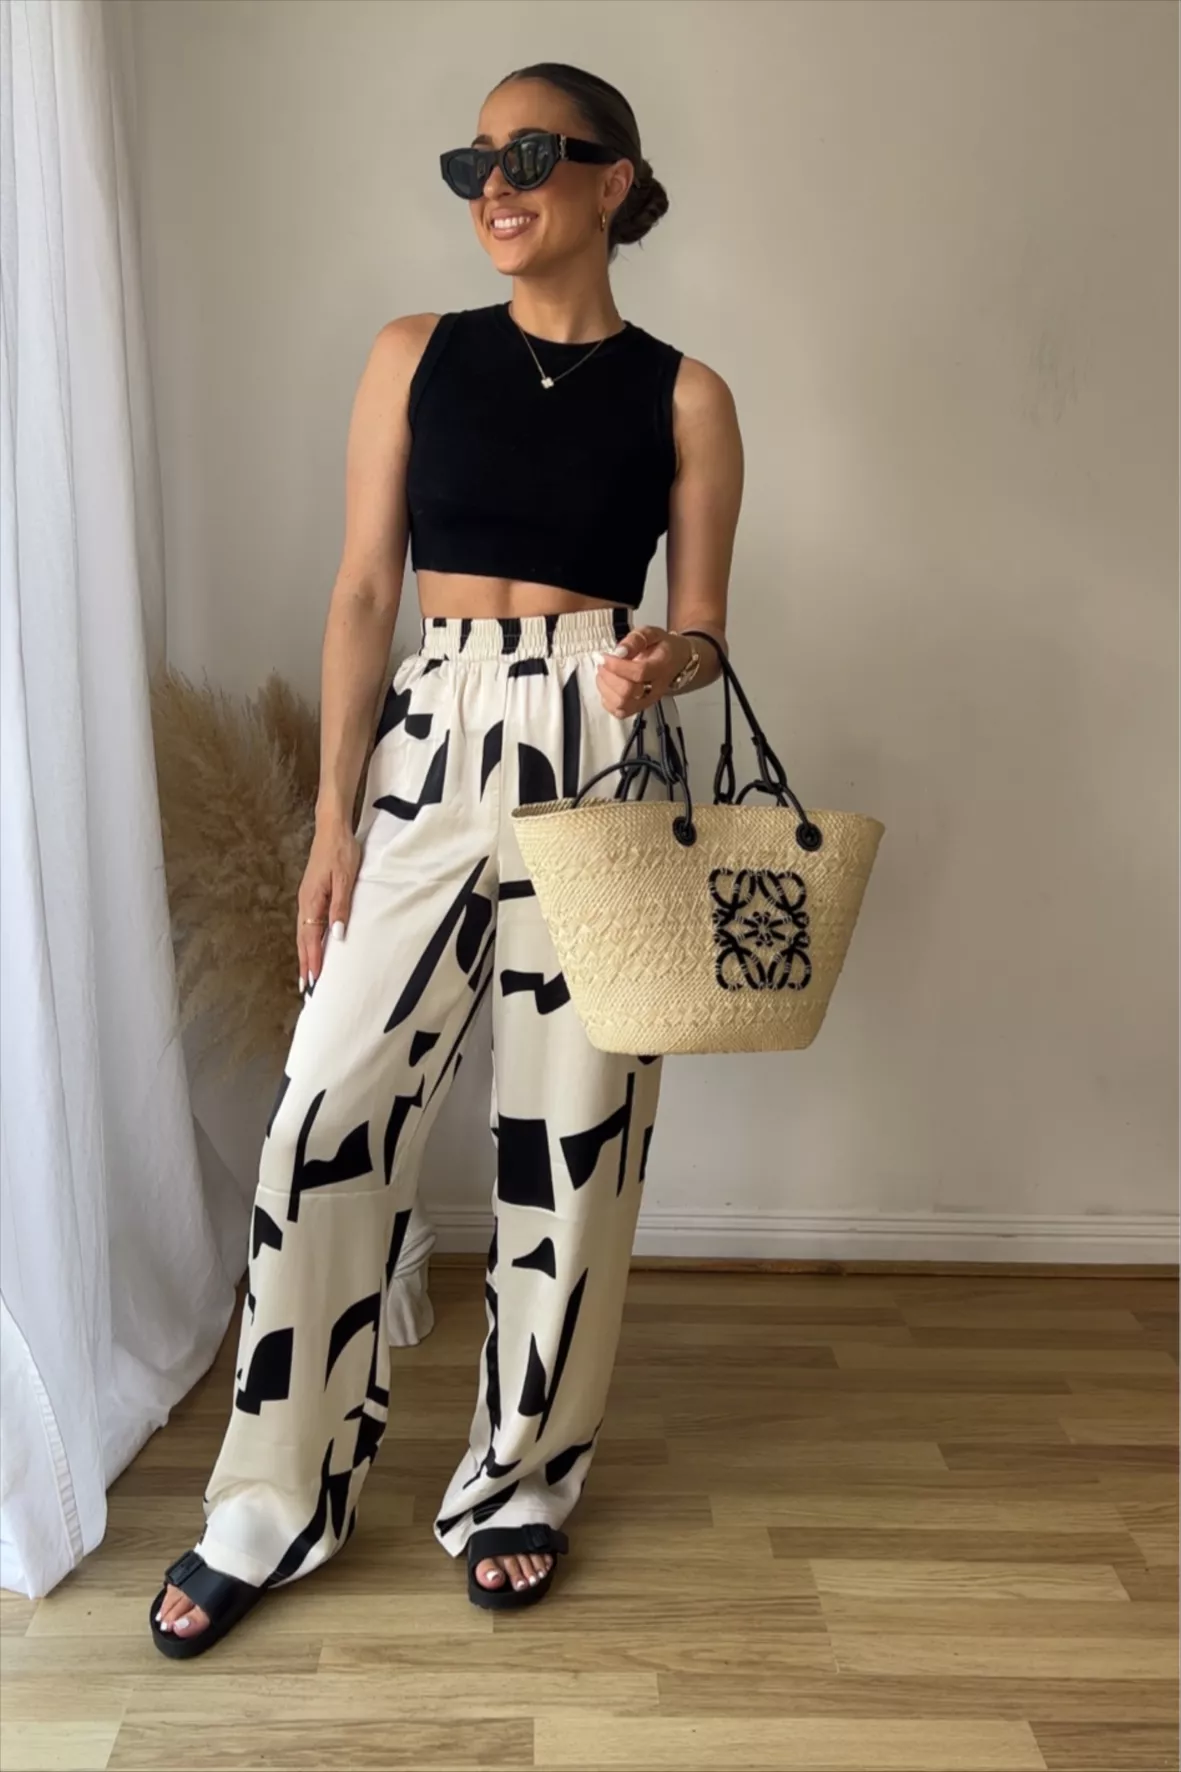 All Kinds Of Reckless Top - Black  Fashion pants, Fashion outfits